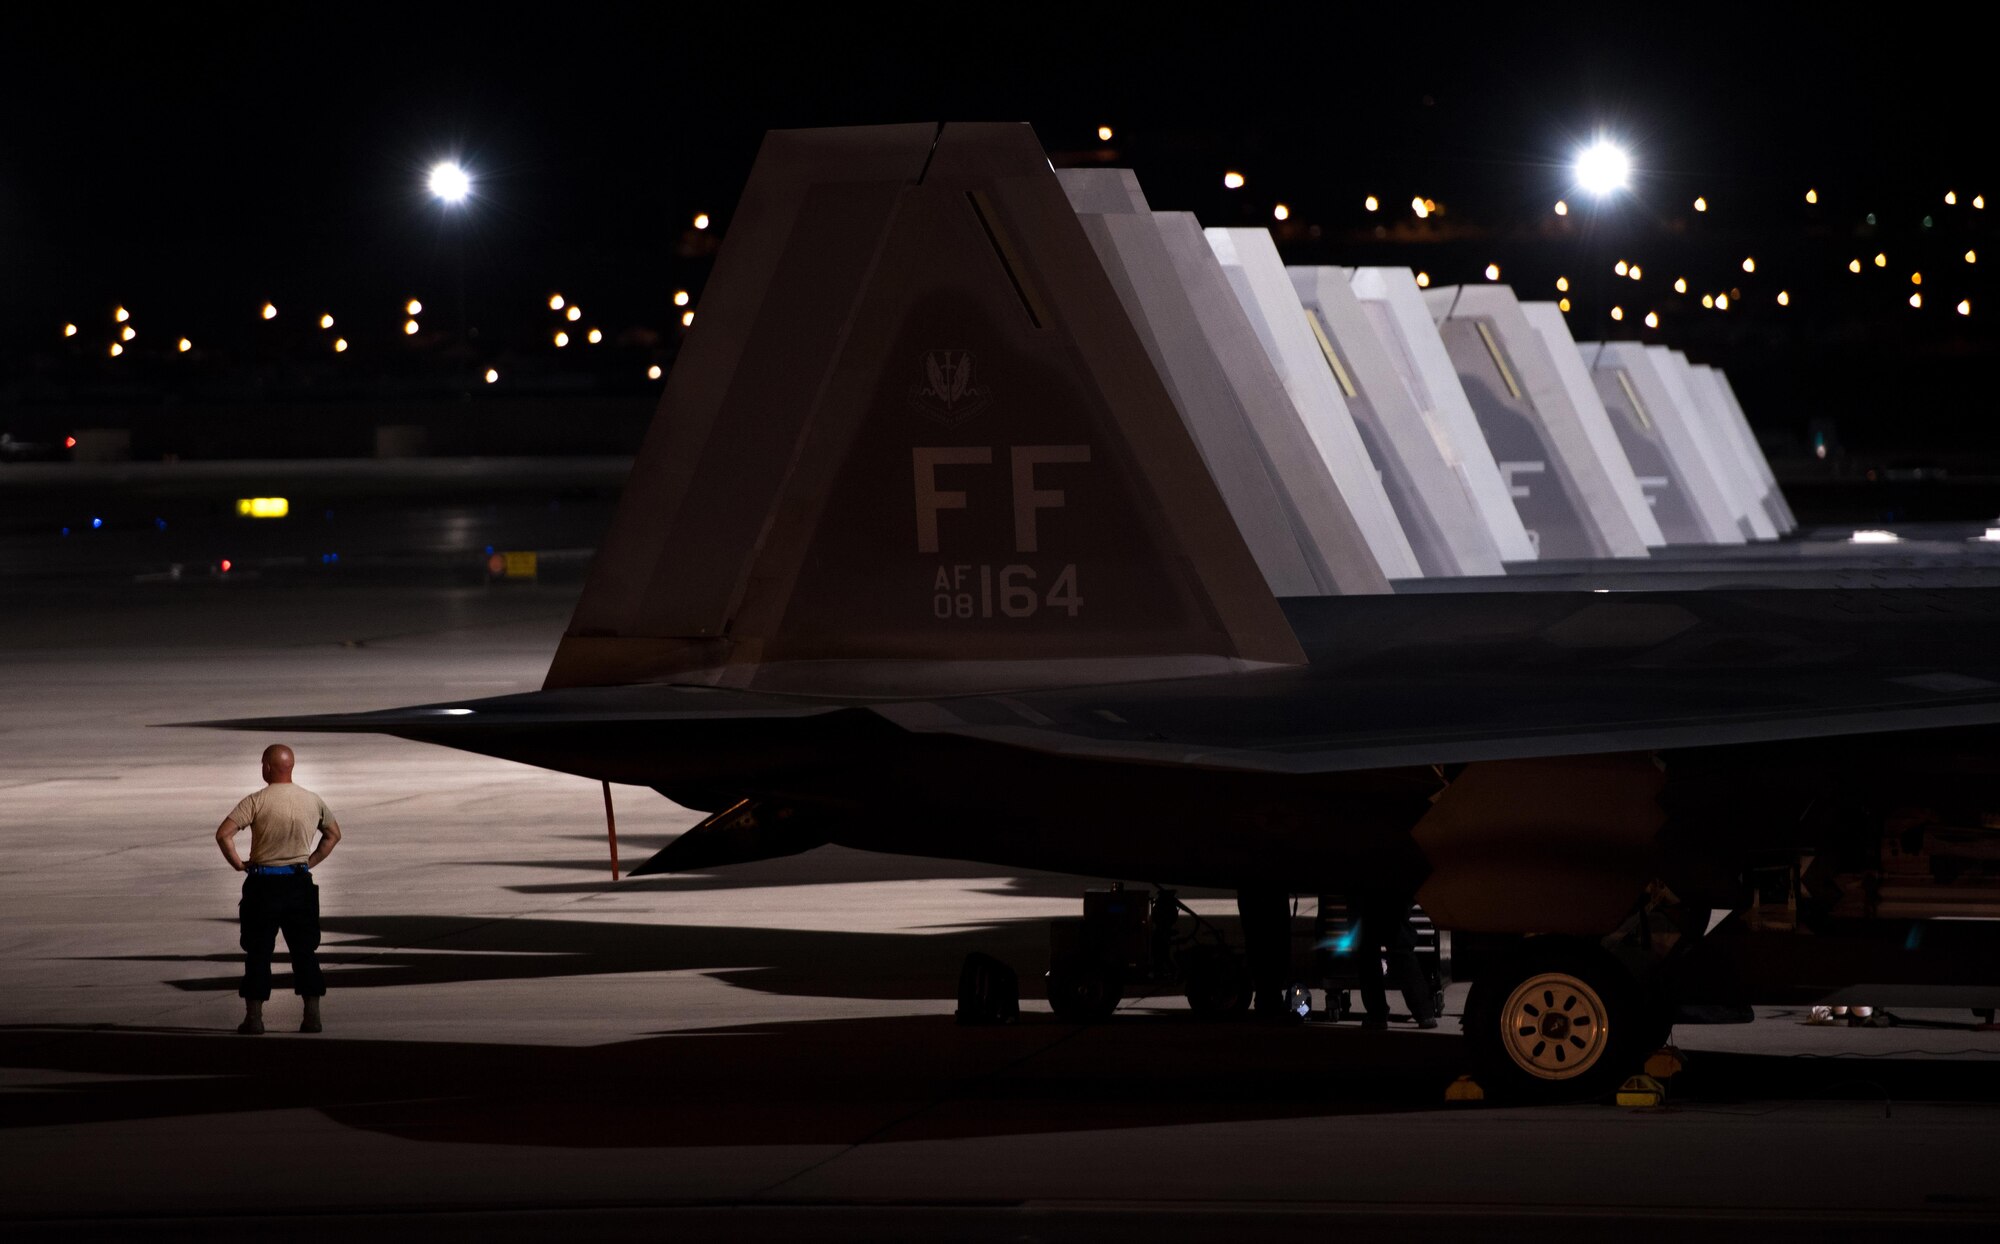 U.S. Air Force Staff Sgt. Courtney Puyear, 94th Aircraft Maintenance Unit crew chief awaits 94th Fighter Squadron pilots to arrive to their jets for Red Flag 17-4 at Nellis Air Force Base, Nev., Aug. 21, 2017. The 94th FS is currently deployed to Red Flag 17-4, taking part in an multi-dimensional simulated air and ground combat environment. (U.S. Air Force photo by Staff Sgt. Carlin Leslie)